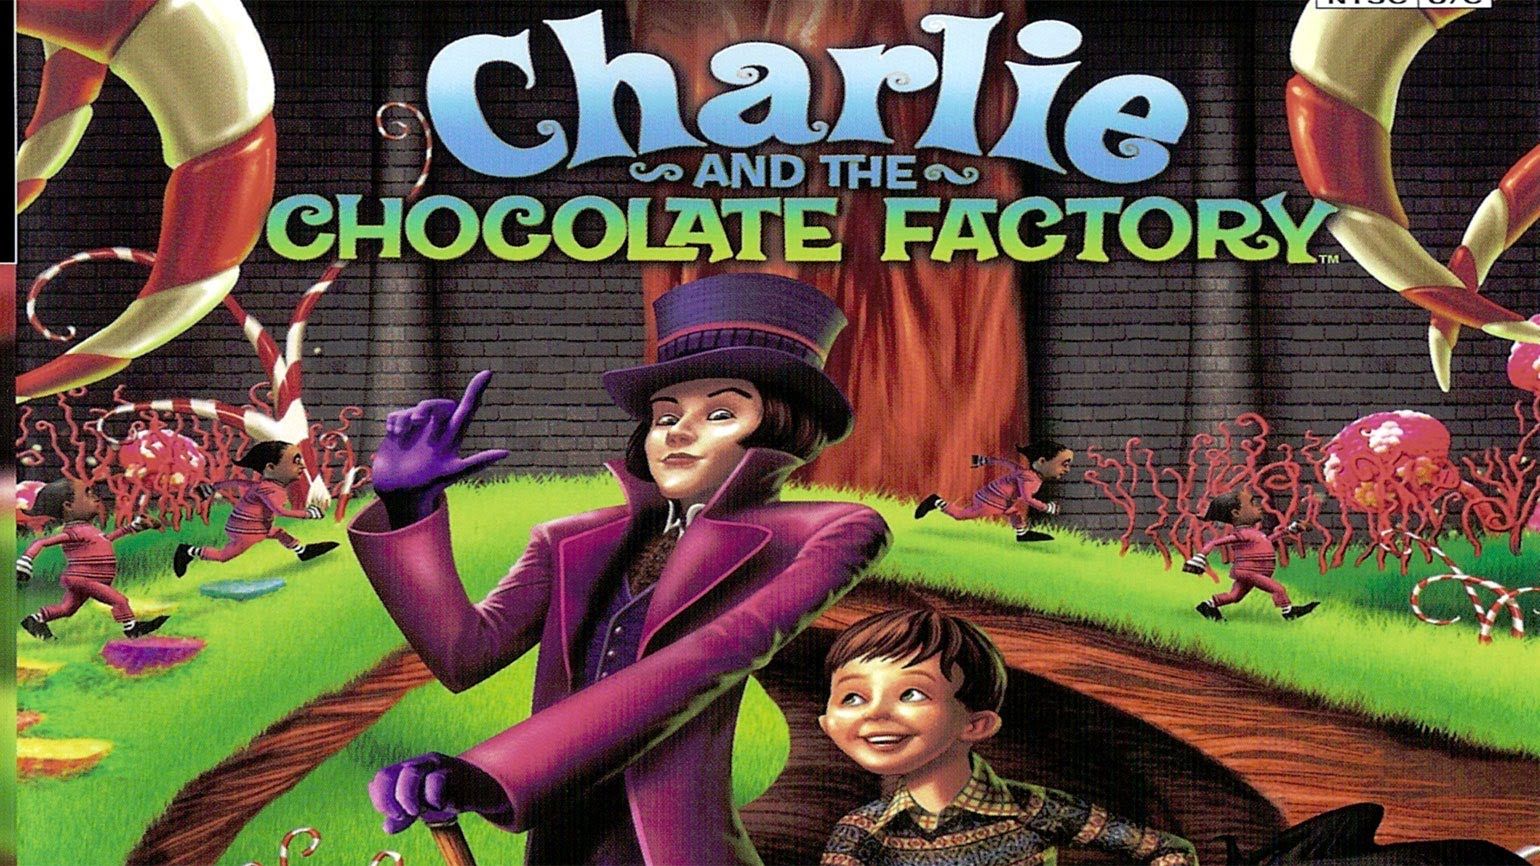 A wallpaper for Charlie and the Chocolate Factory